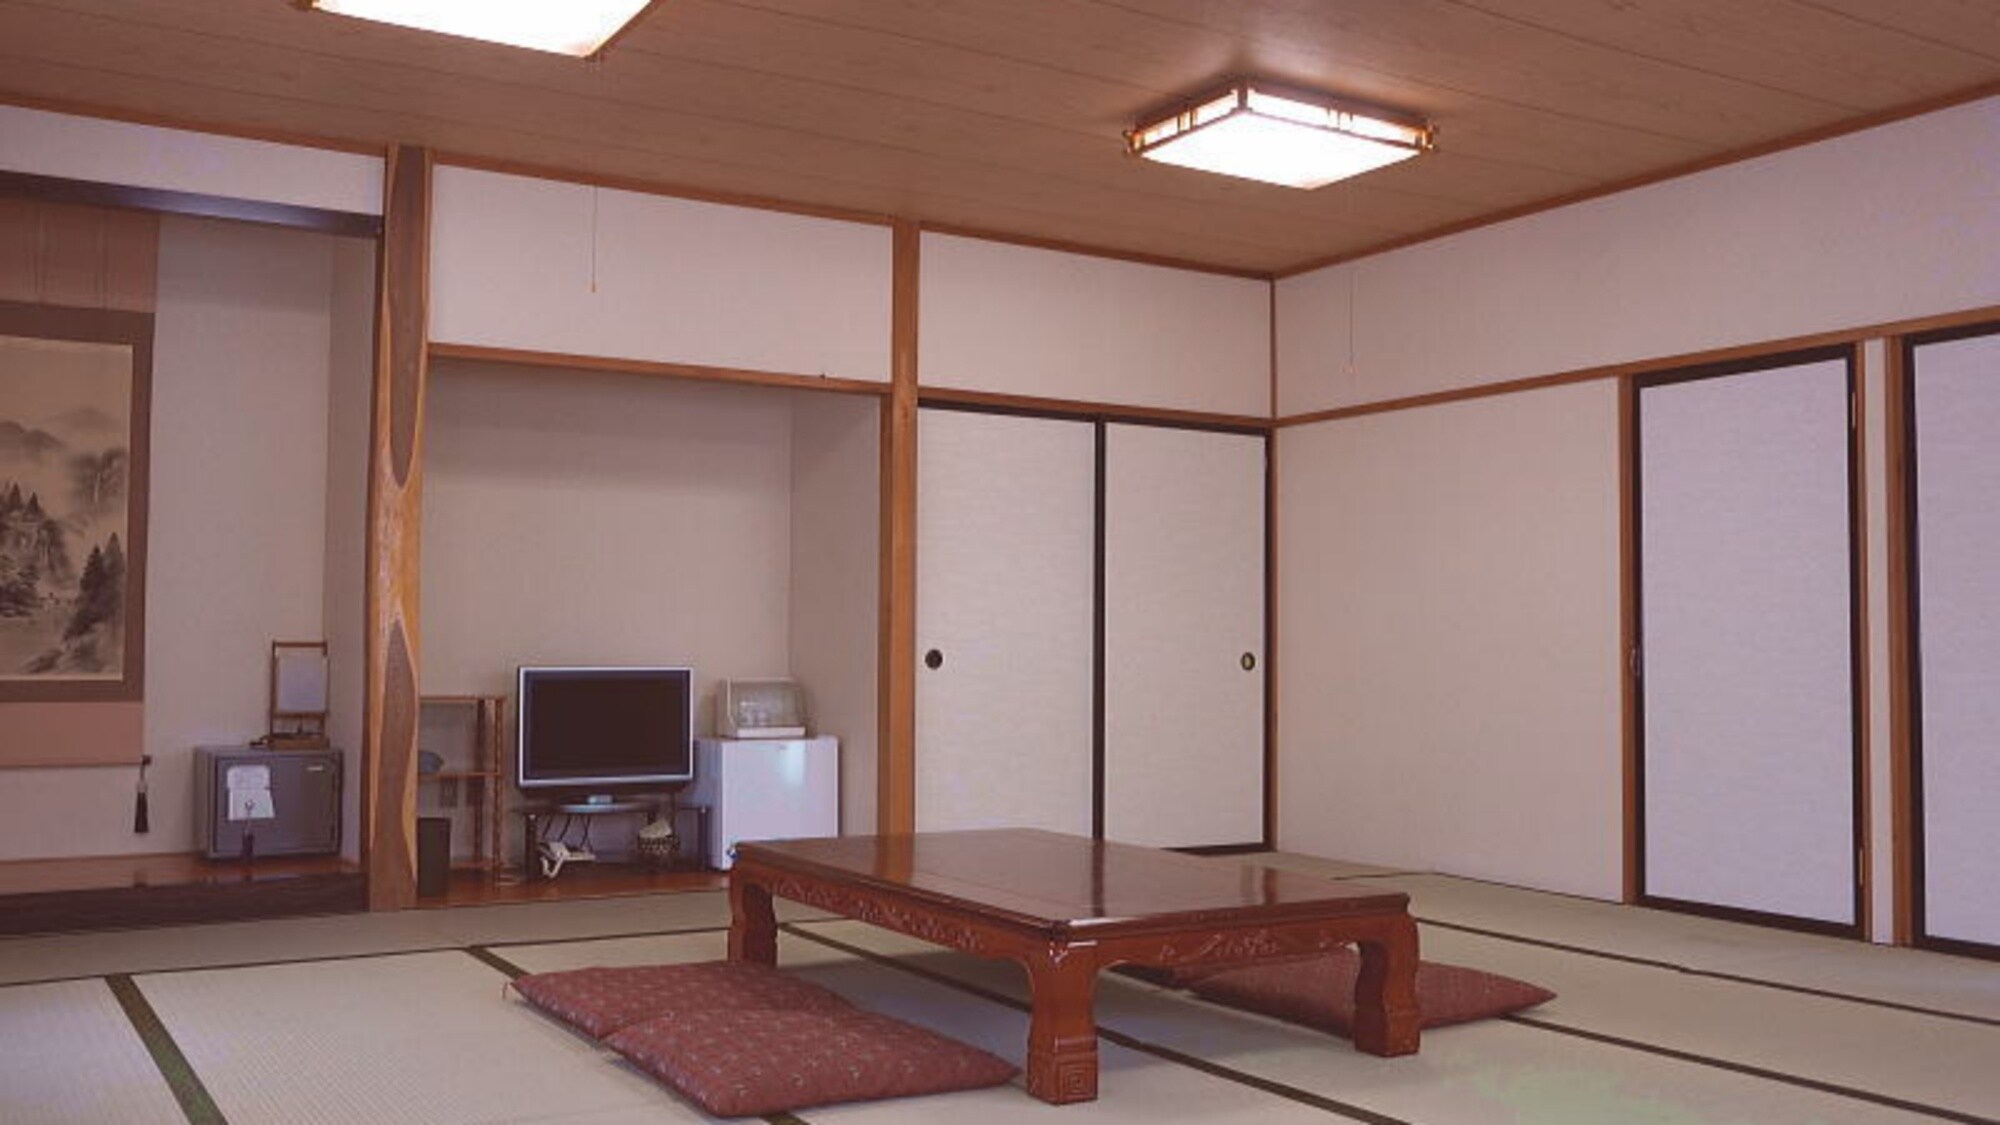 Annex Japanese-style room 18-20 tatami mats (example of guest room)